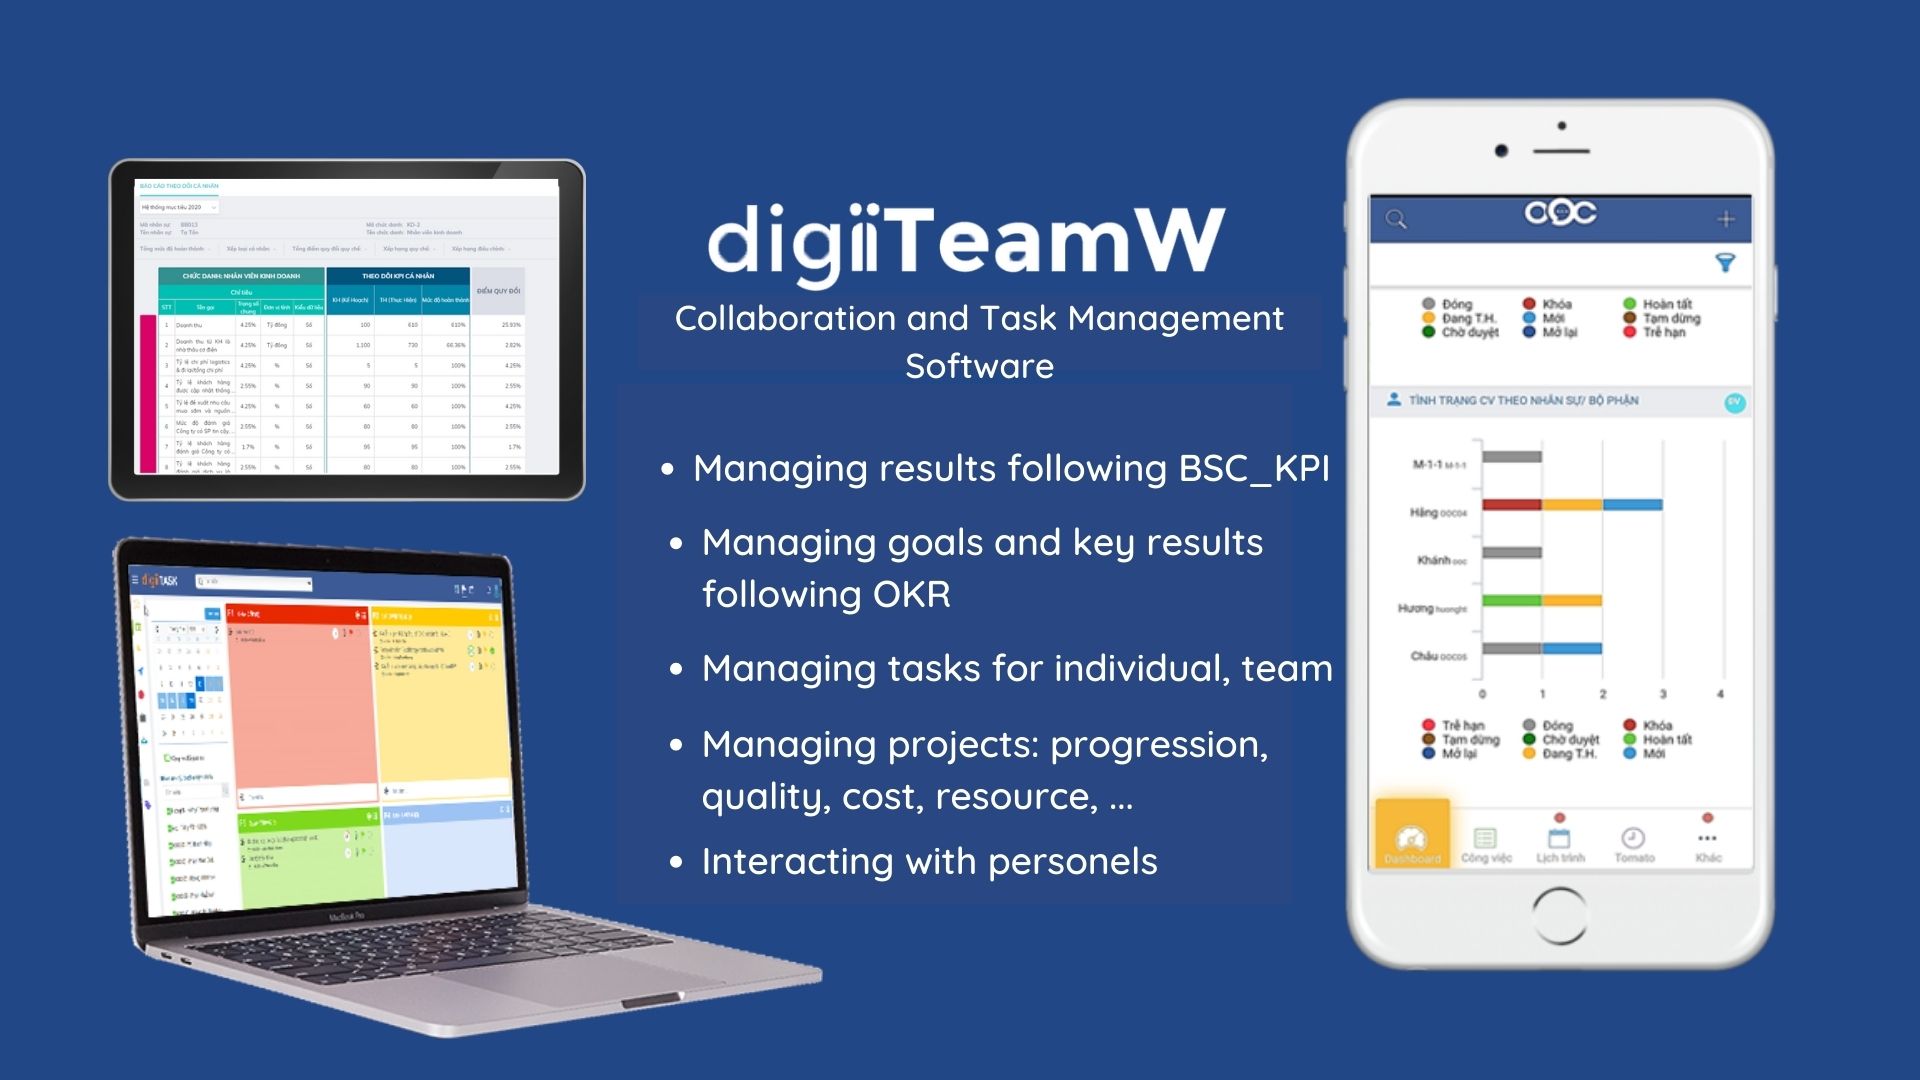 digiiTeamW - Collaboration and Task Management Software 